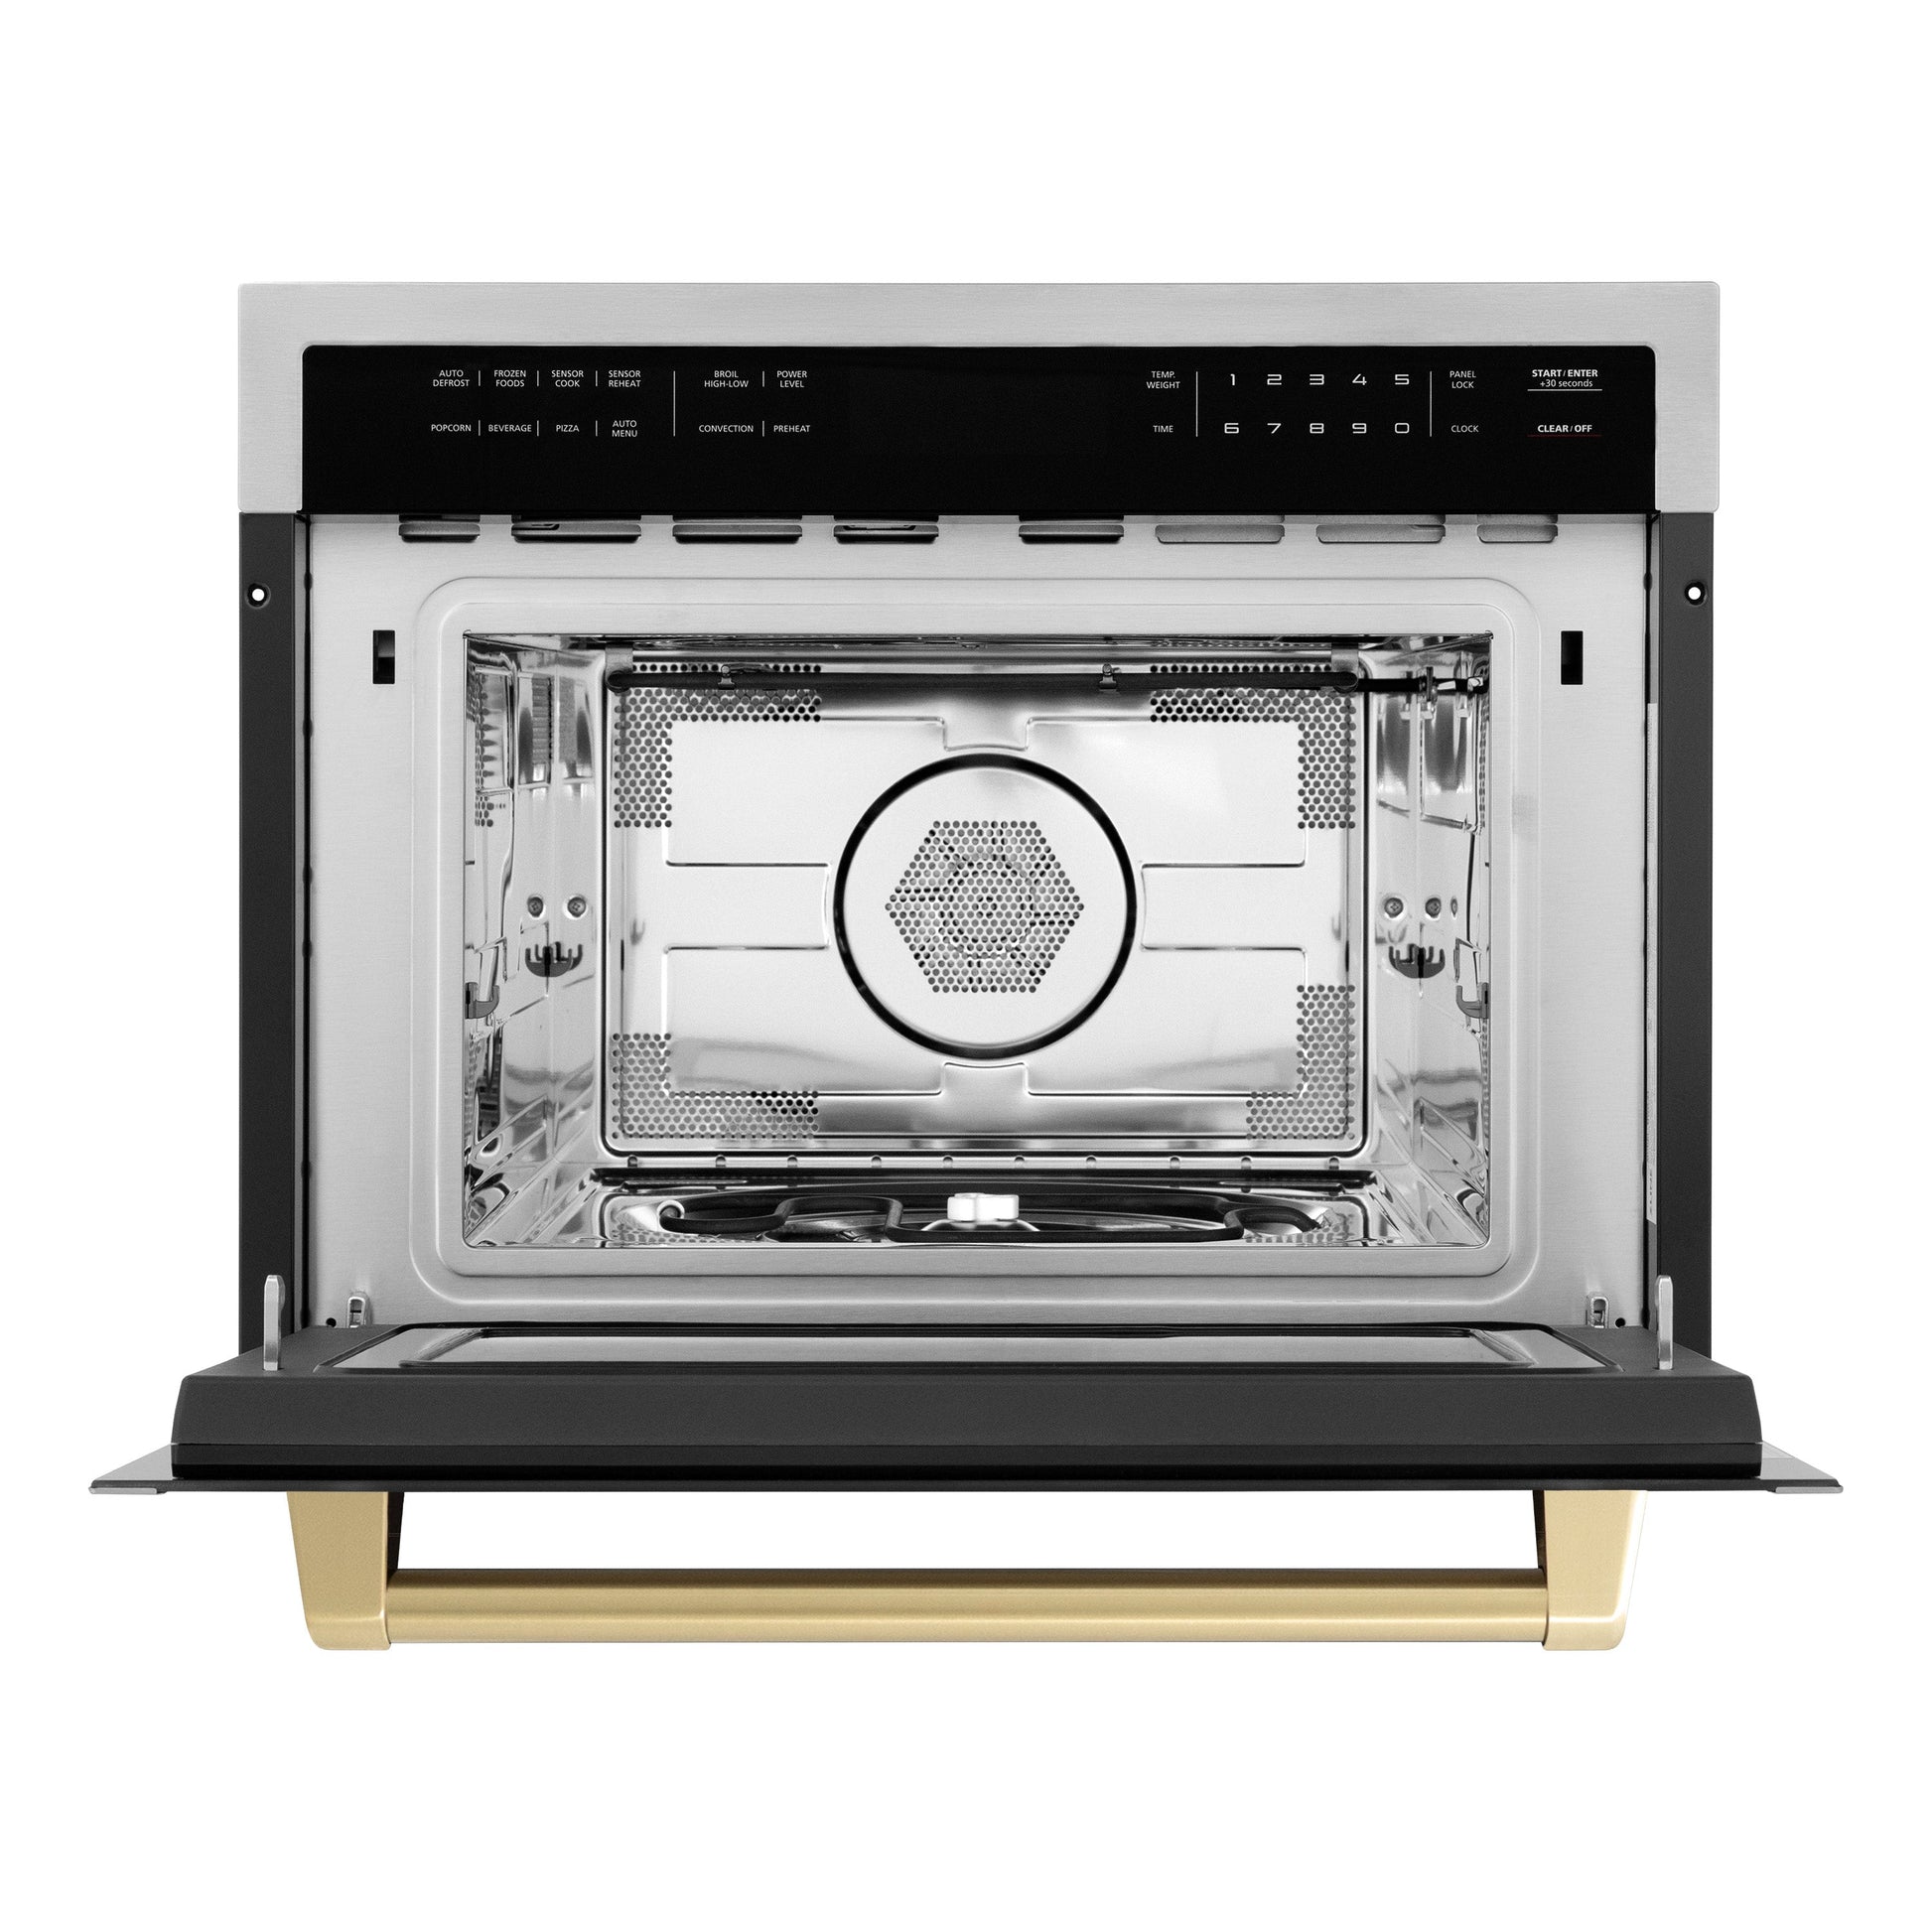 ZLINE Autograph Edition 24" Built-in Convection Microwave Oven - Stainless Steel with Accents